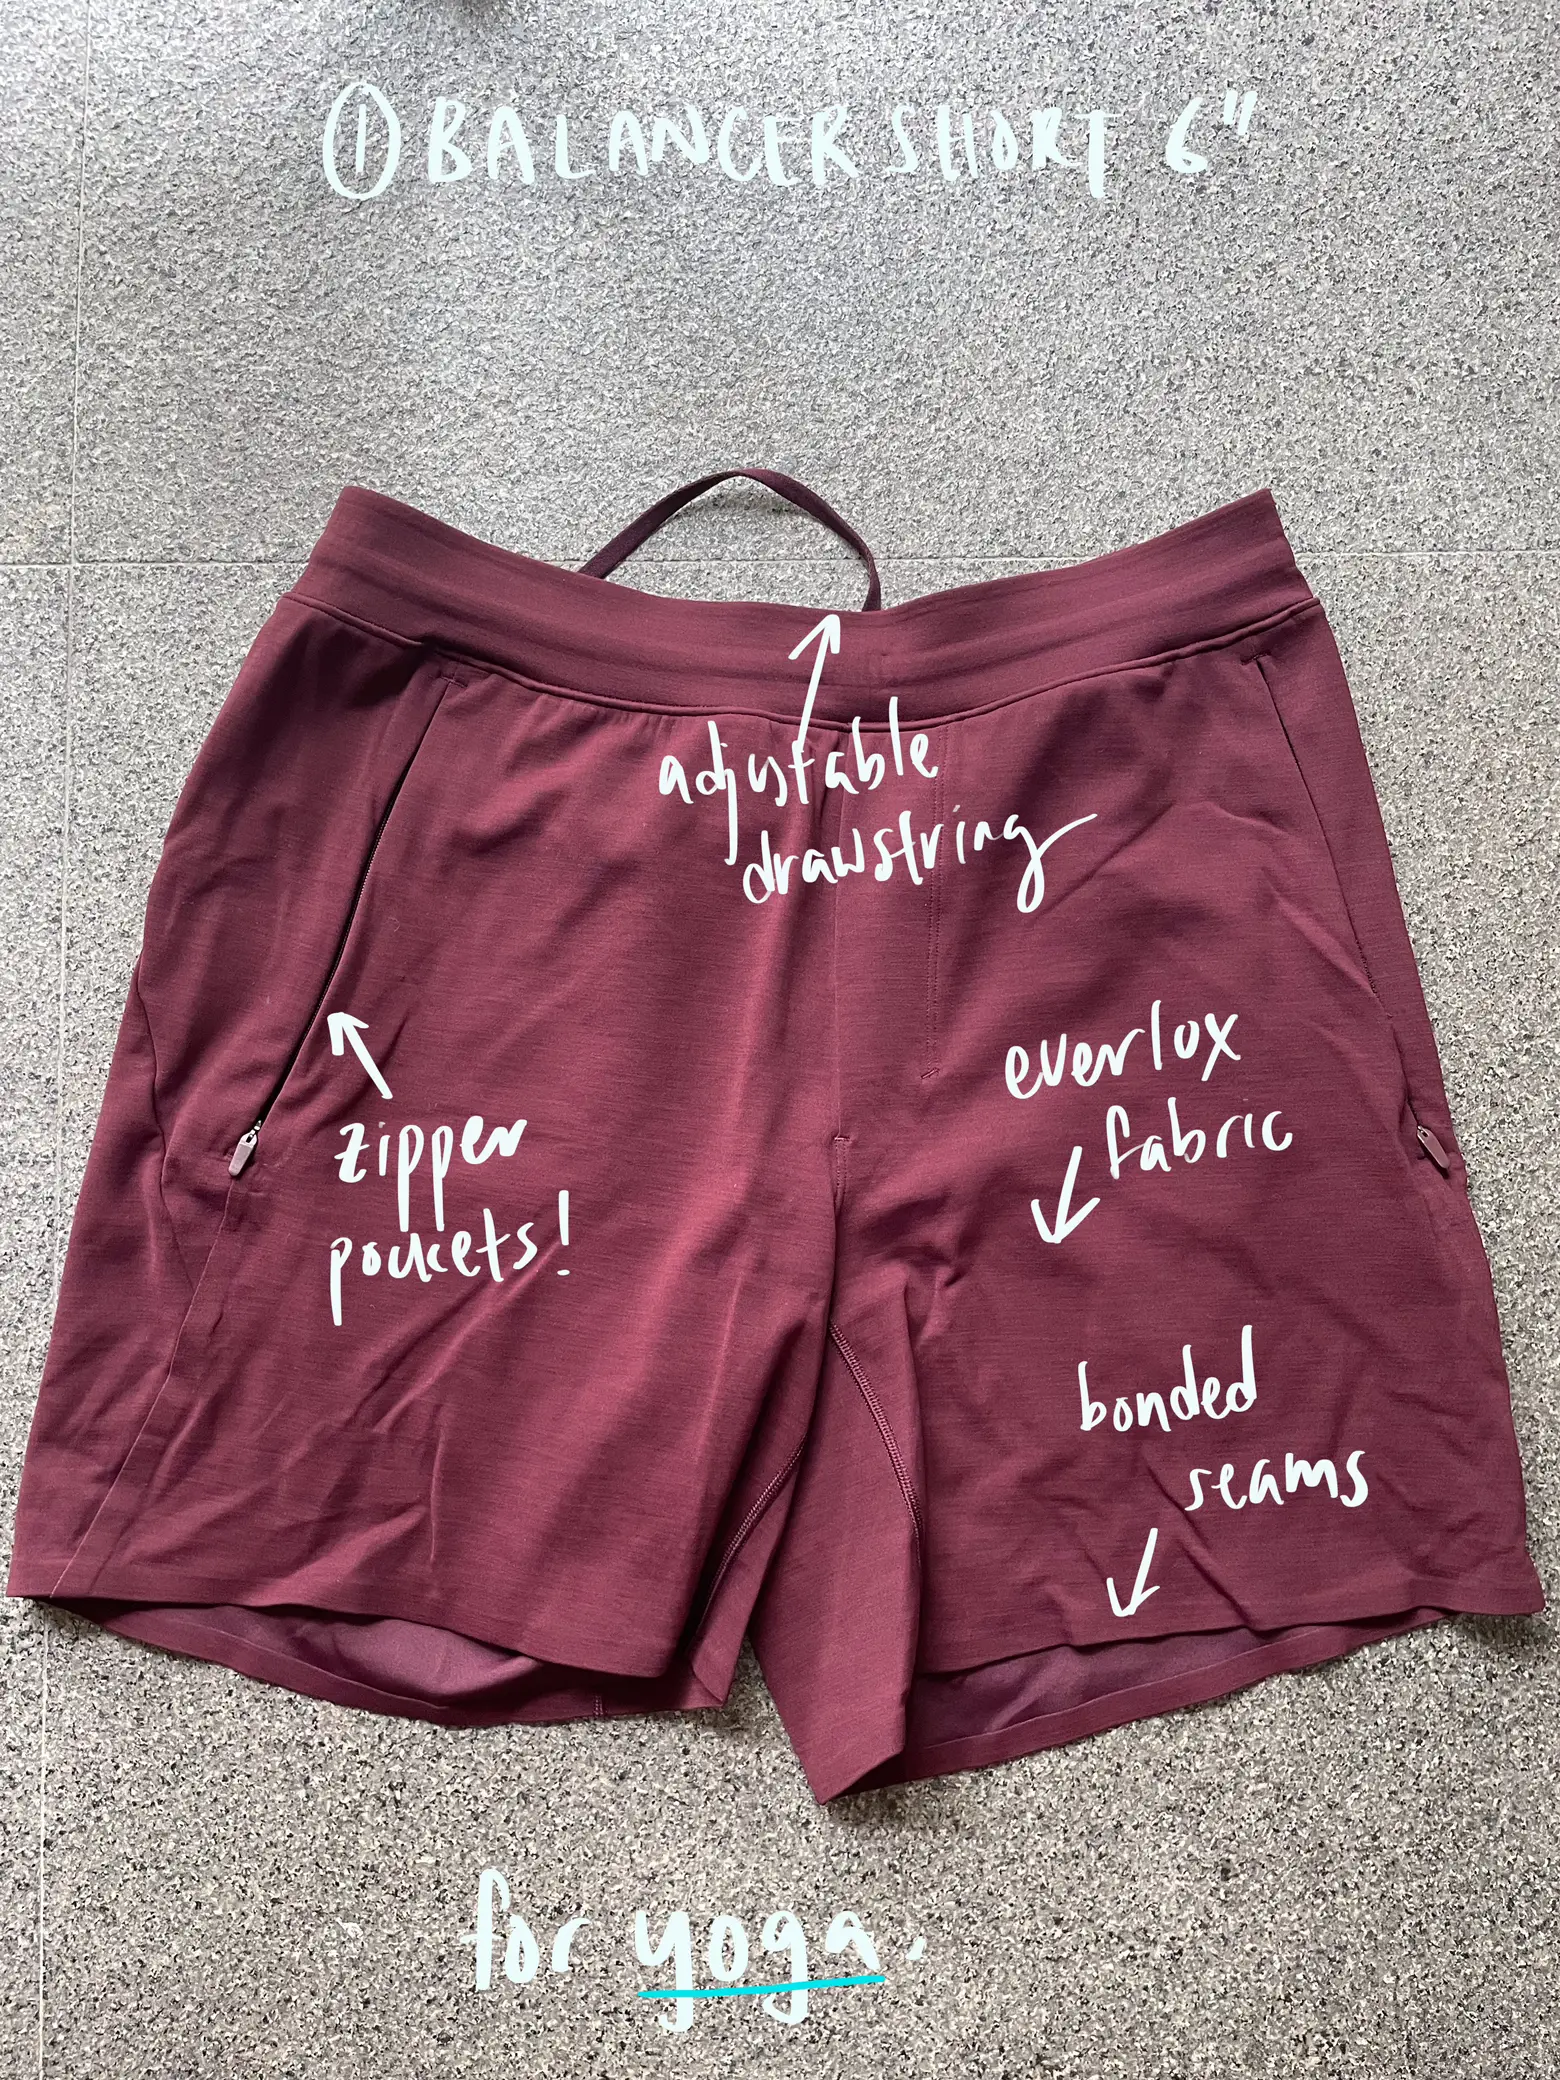 STOCK UP ON THESE LULULEMON MENS SHORTS 🥵, Gallery posted by Ethan Chan